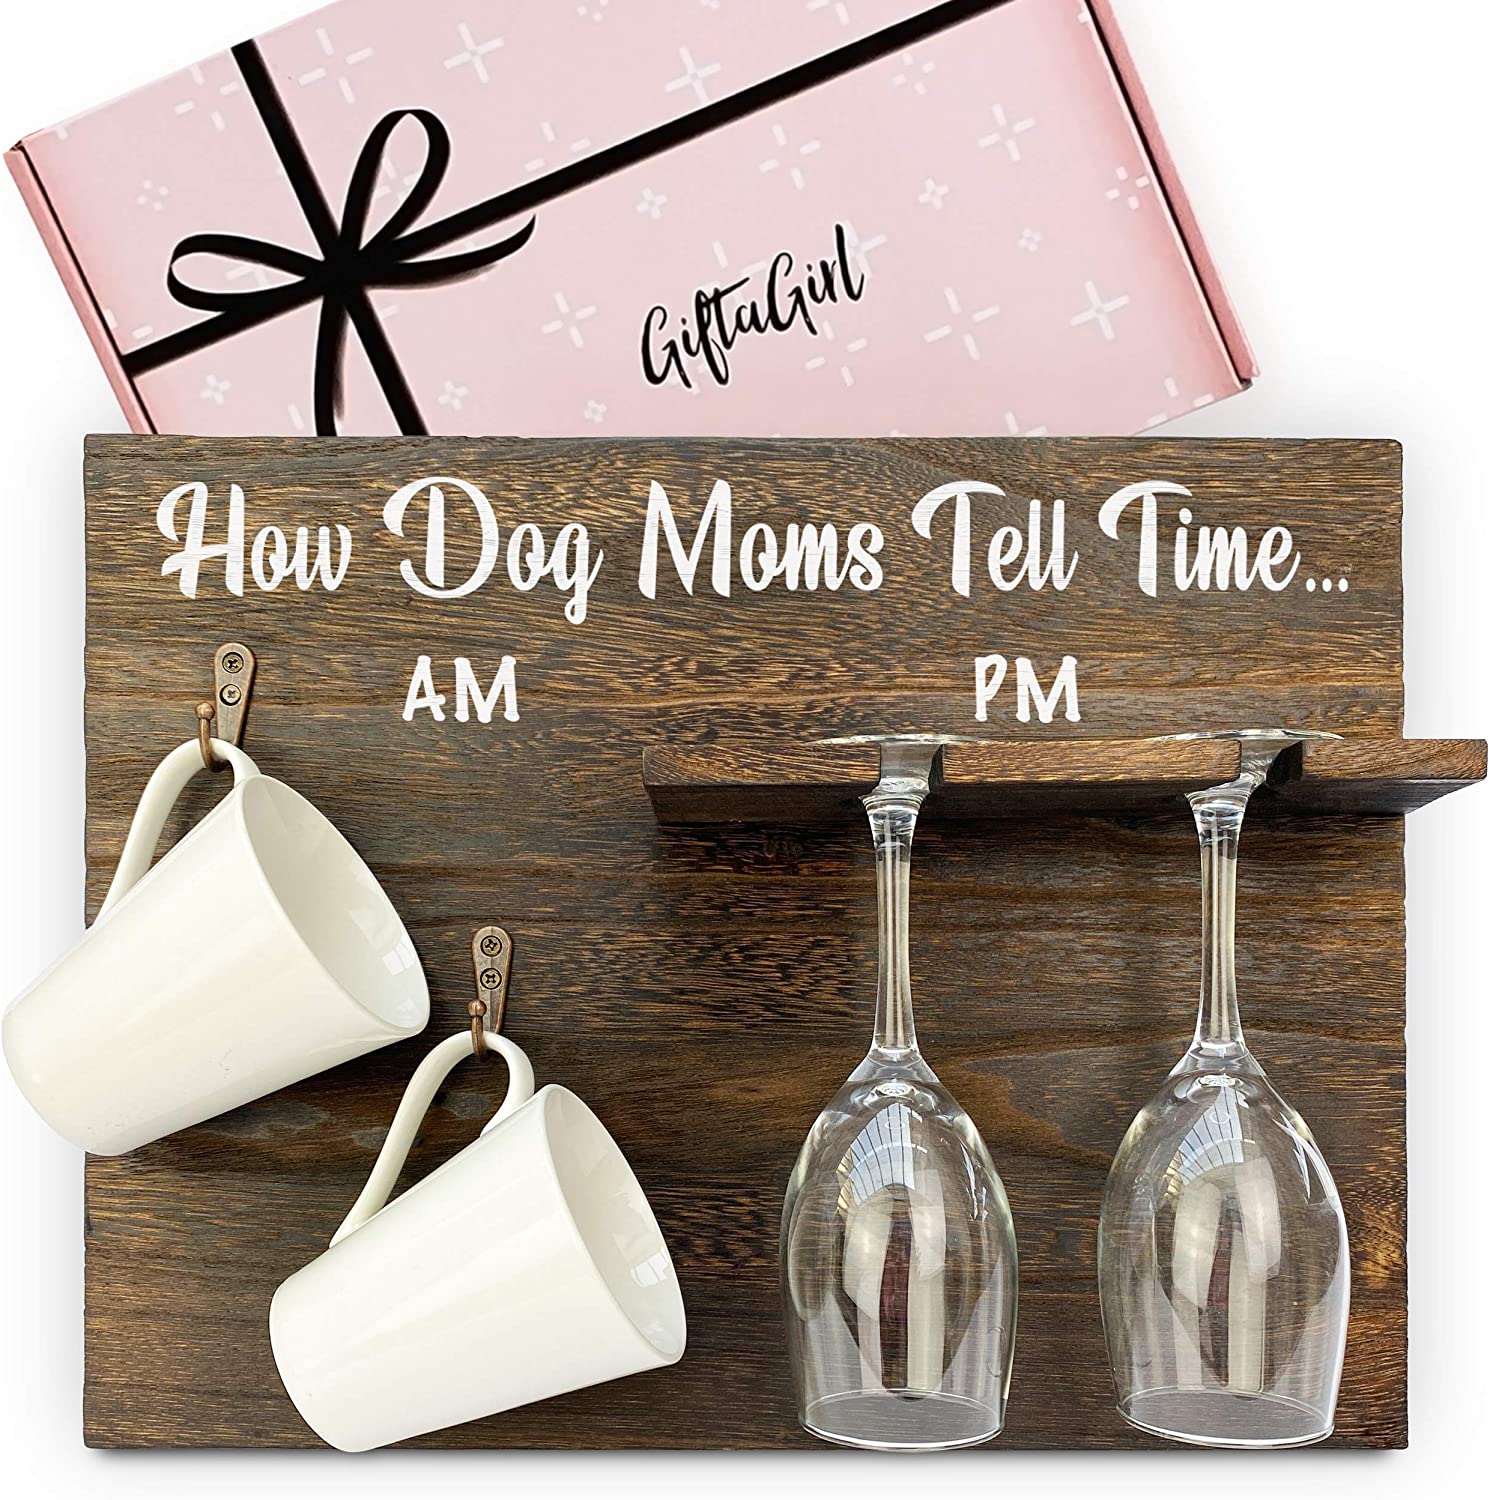 pawesome-gifts-for-a-rockin-dog-mom-how-dog-moms-tell-time